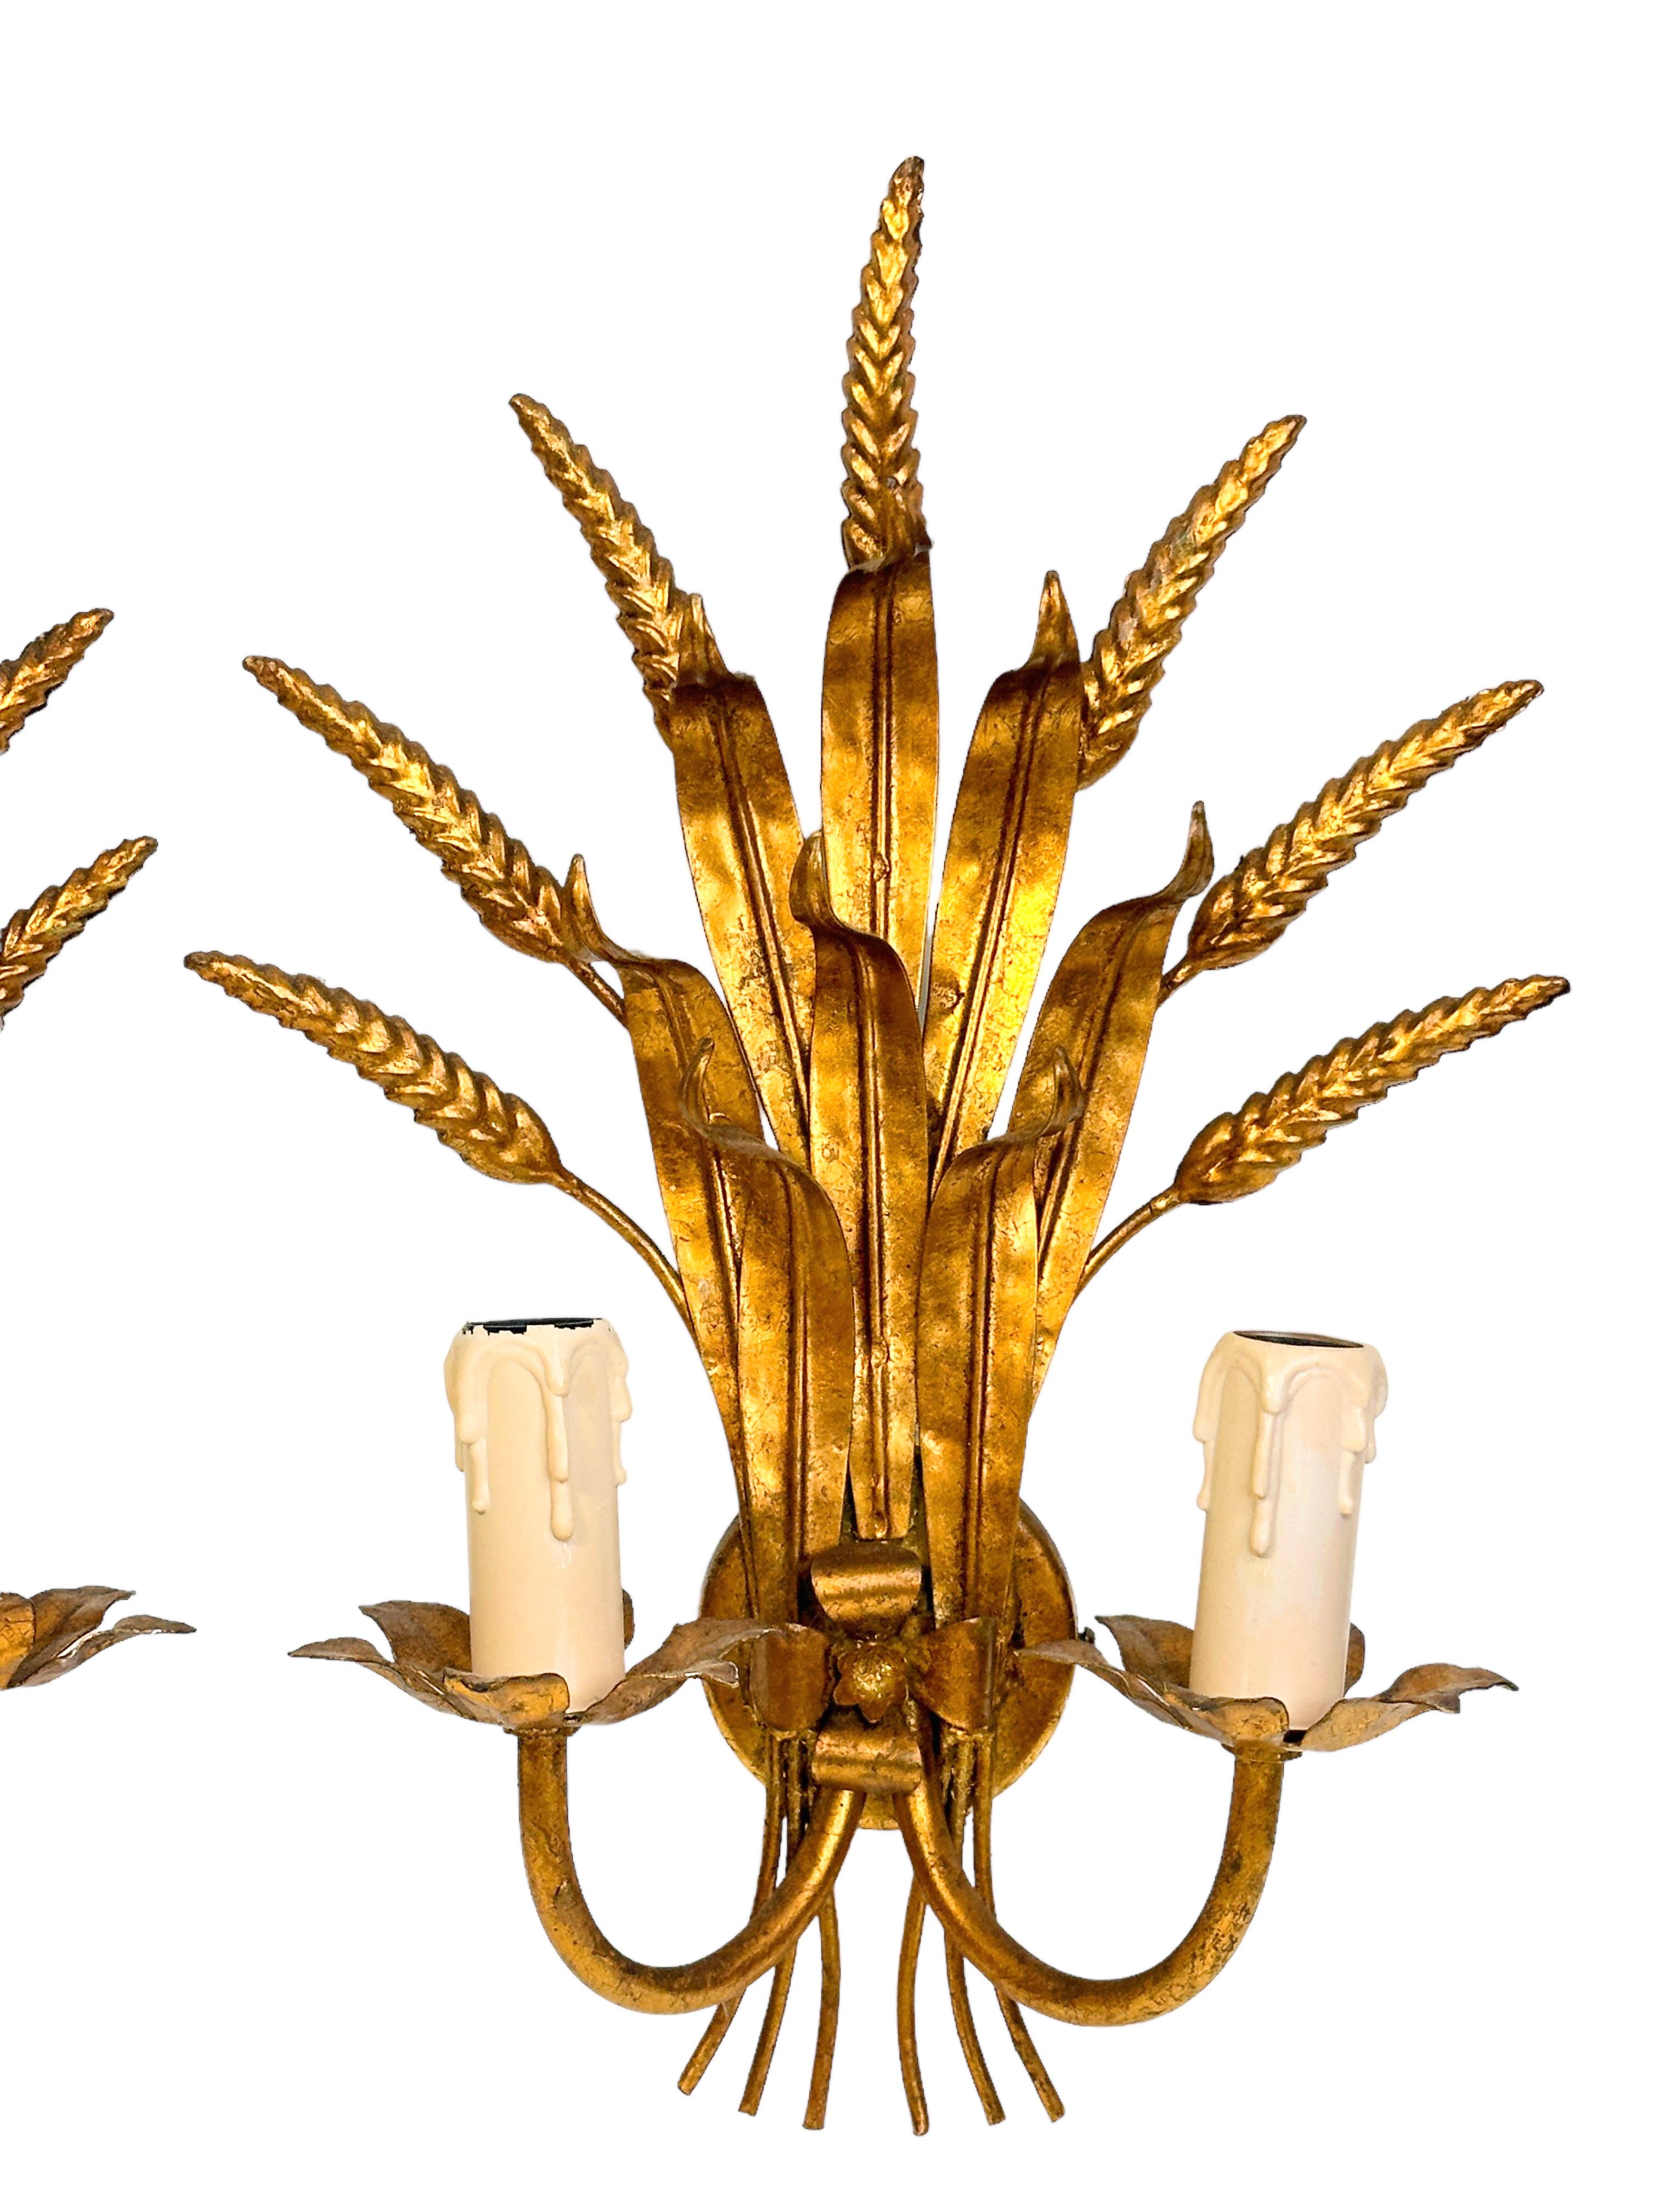 A pair Hollywood Regency mid-century gilt tole wheat sheaf sconces, each fixture requires two European E14 candelabra bulbs, each bulb up to 40 watts. The wall lights have a beautiful patina and gives each room an eclectic statement. Nice to hang in